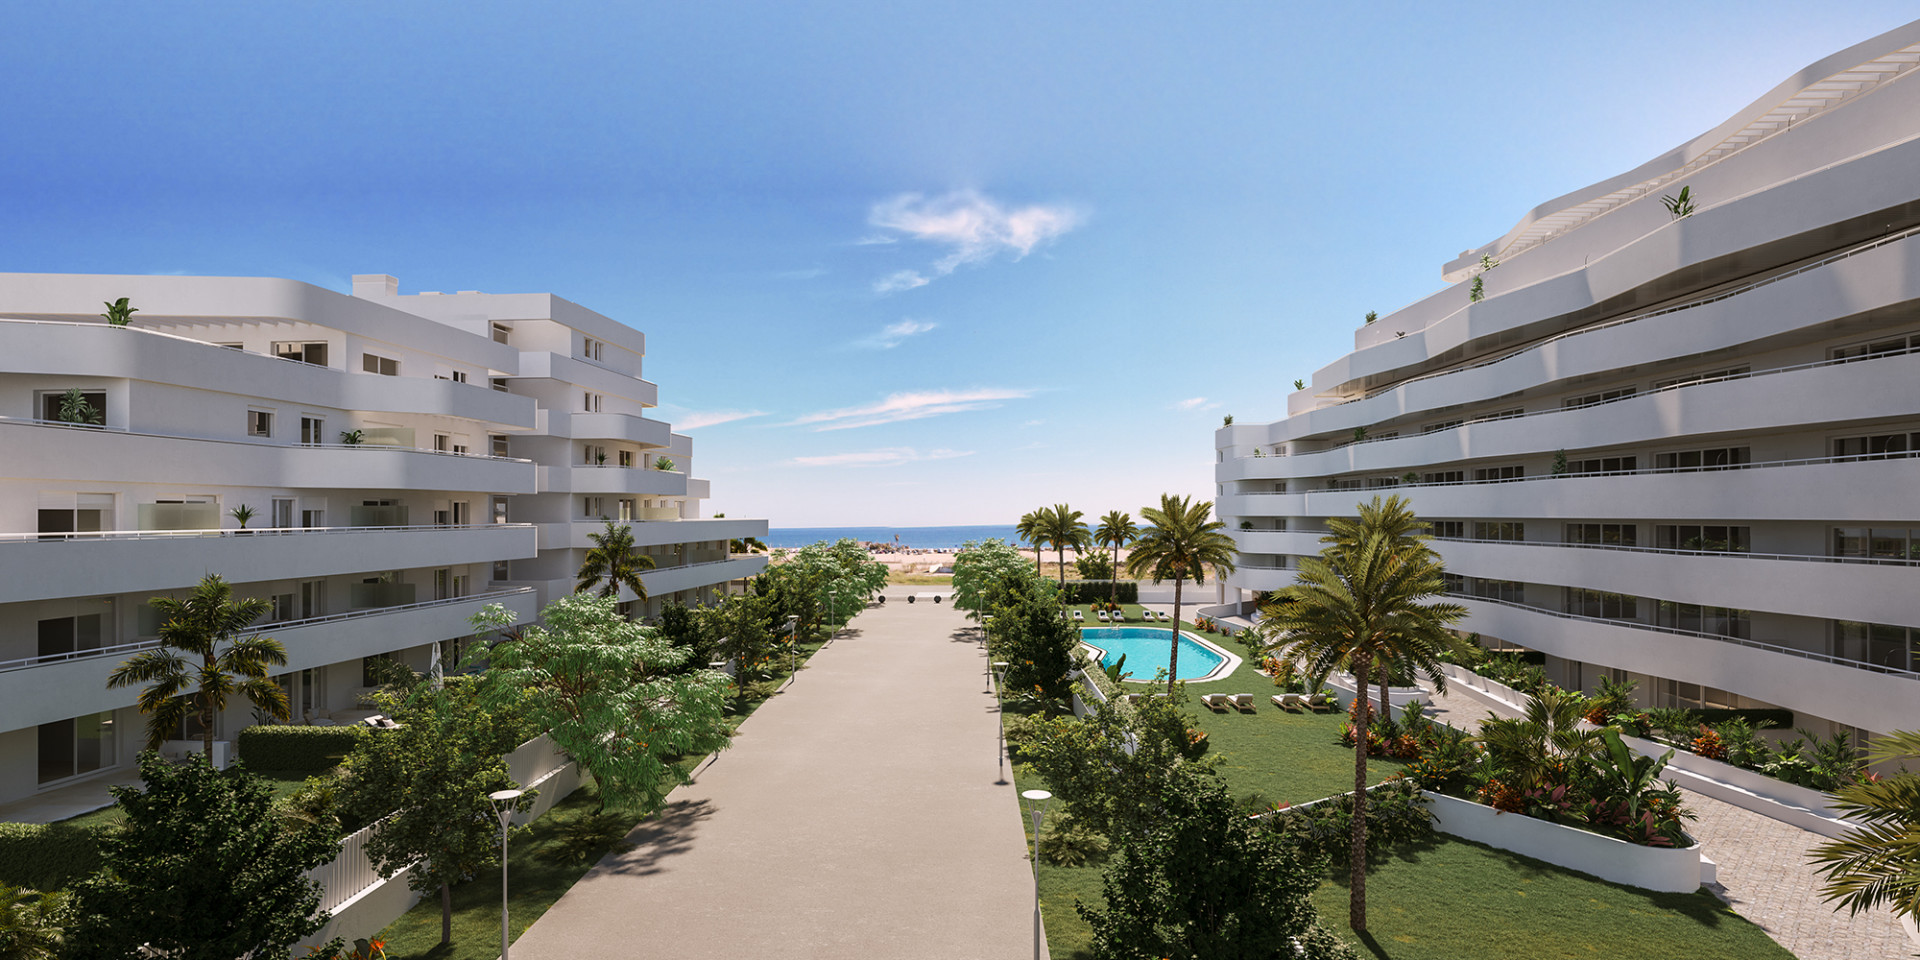 Modern flat with garden and private swimming pool located in Torre del Mar, Malaga. | Image 1